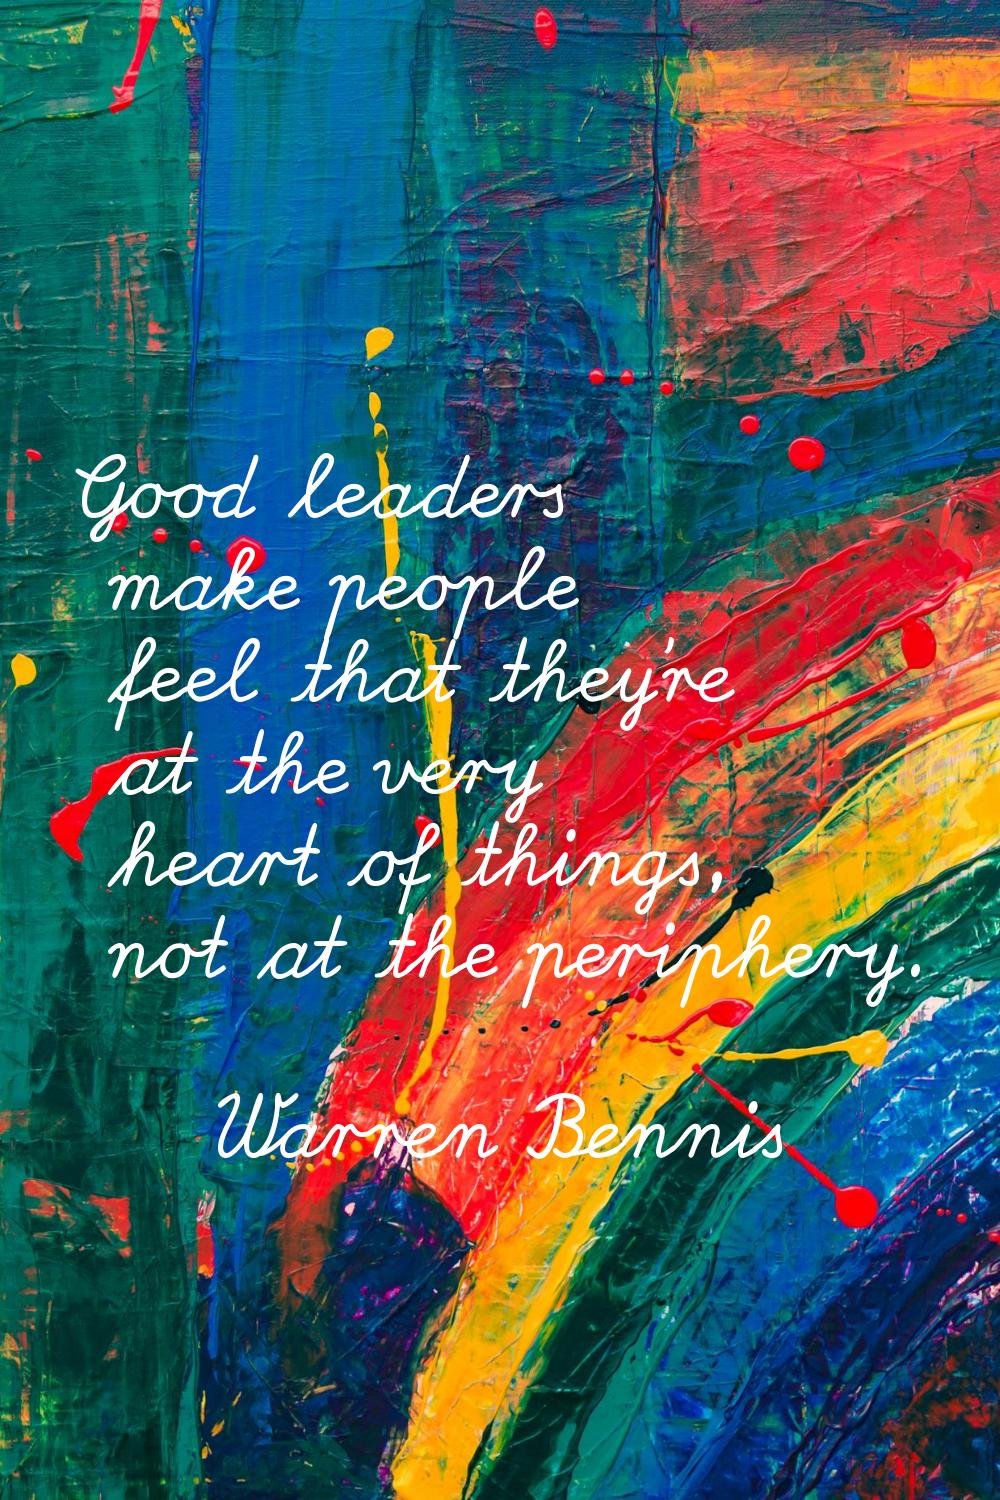 Good leaders make people feel that they're at the very heart of things, not at the periphery.